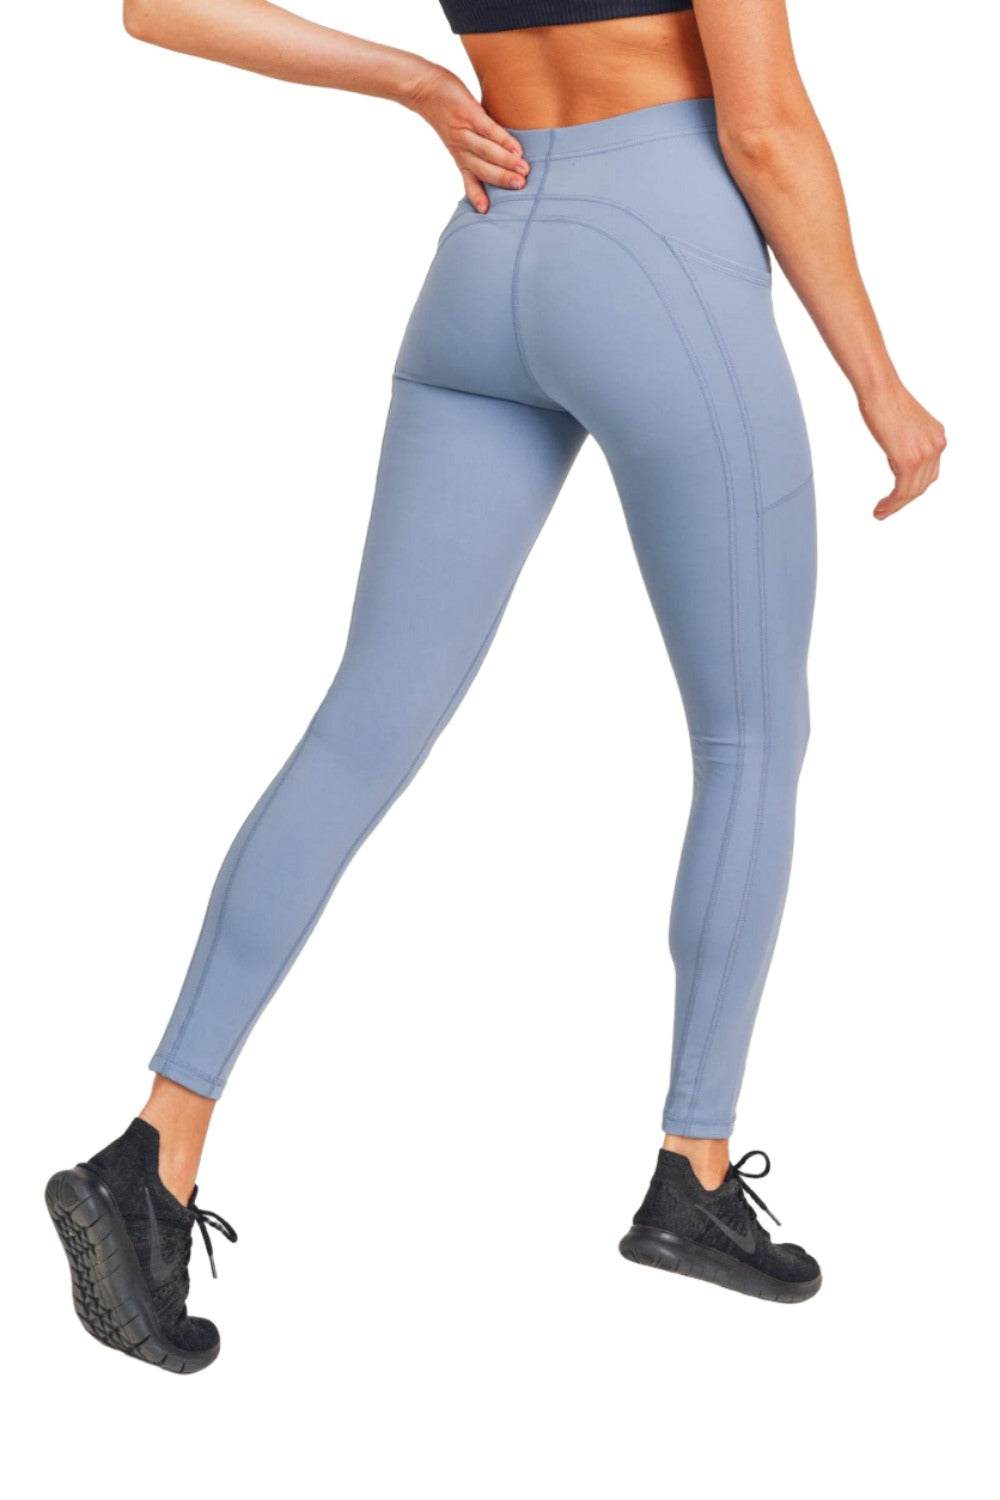 MonoB Zig Zag Perforated Mineral Wash Seamless Leggings – CLOTHES